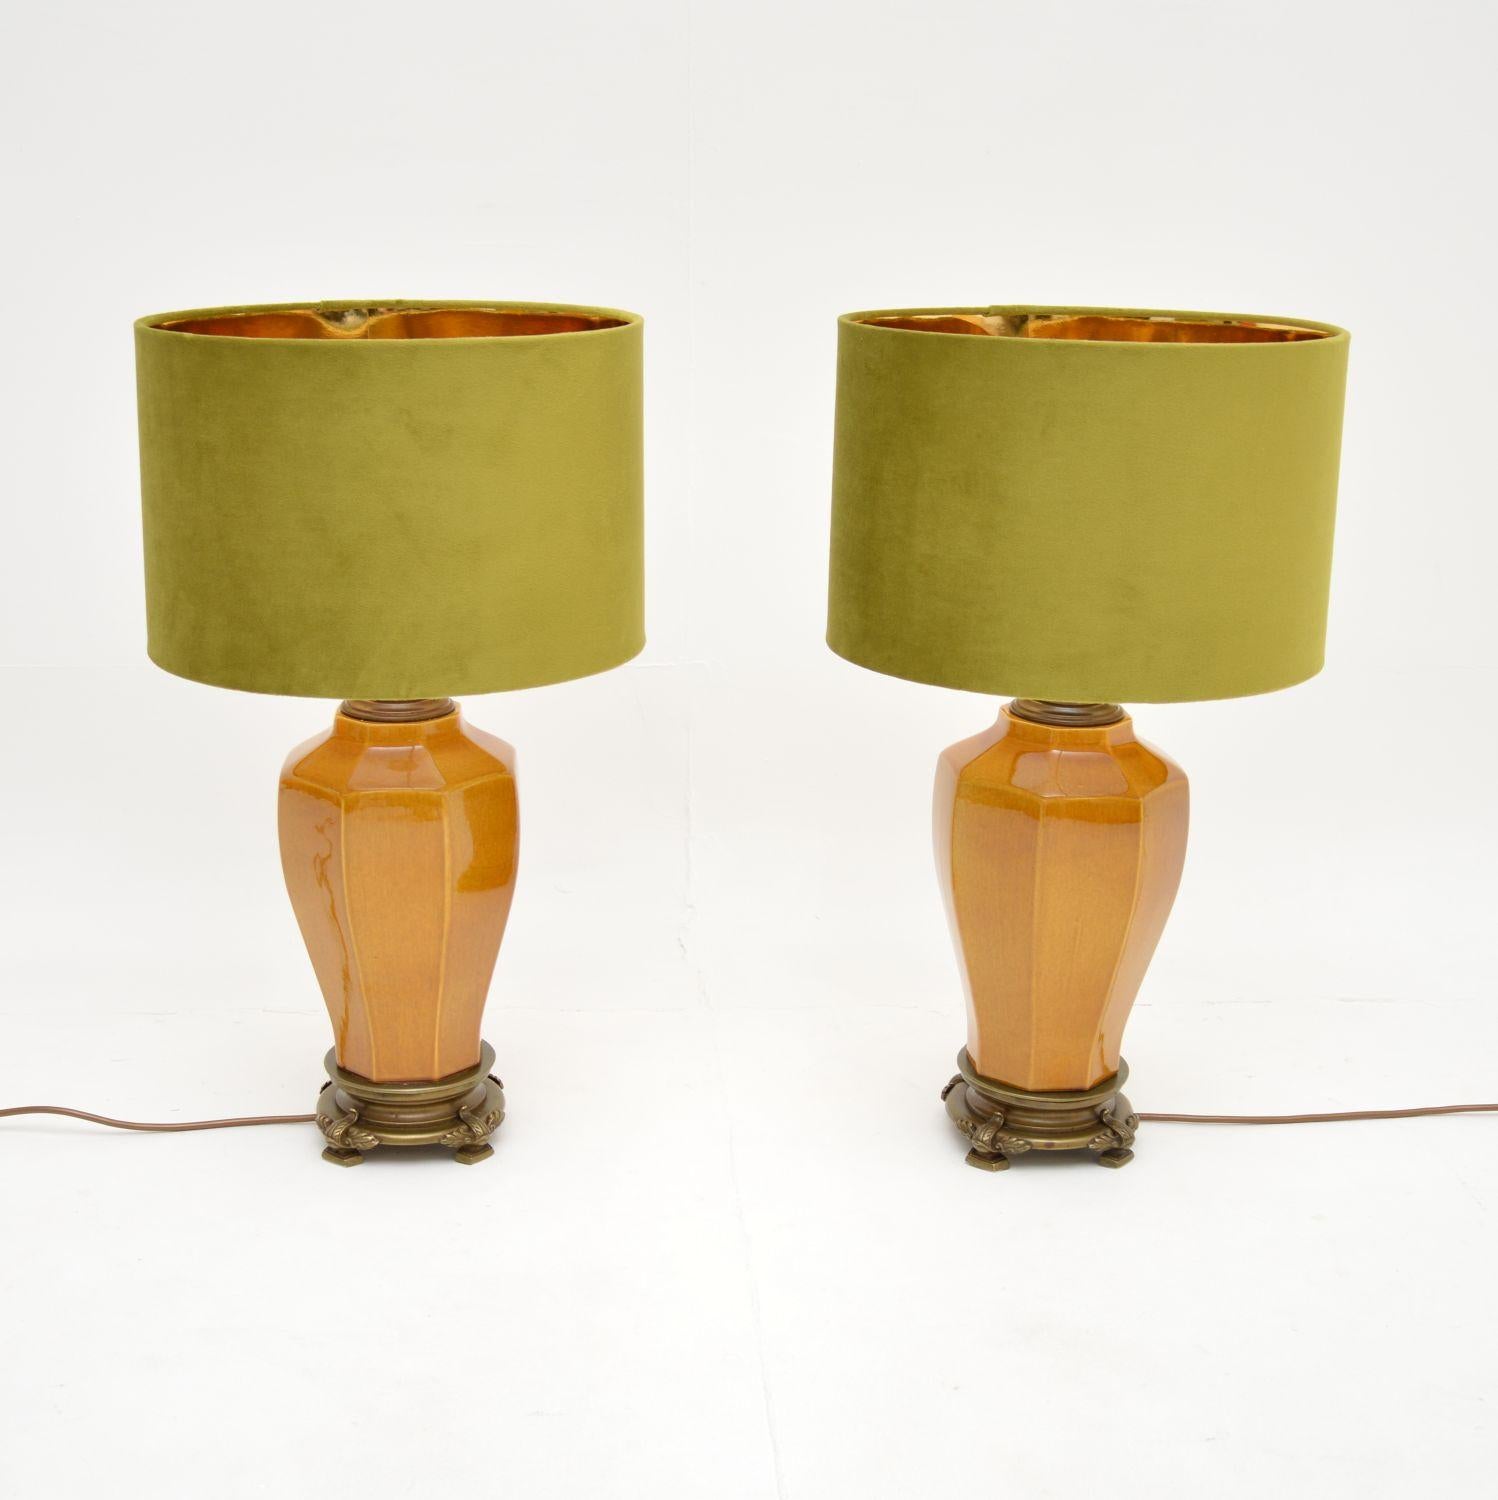 A stunning pair of vintage porcelain table lamps, made in England, and dating from around the 1960’s.

They are of amazing quality, with great proportions and a gorgeous colour tone to the porcelain glaze. They sit on beautifully designed brass